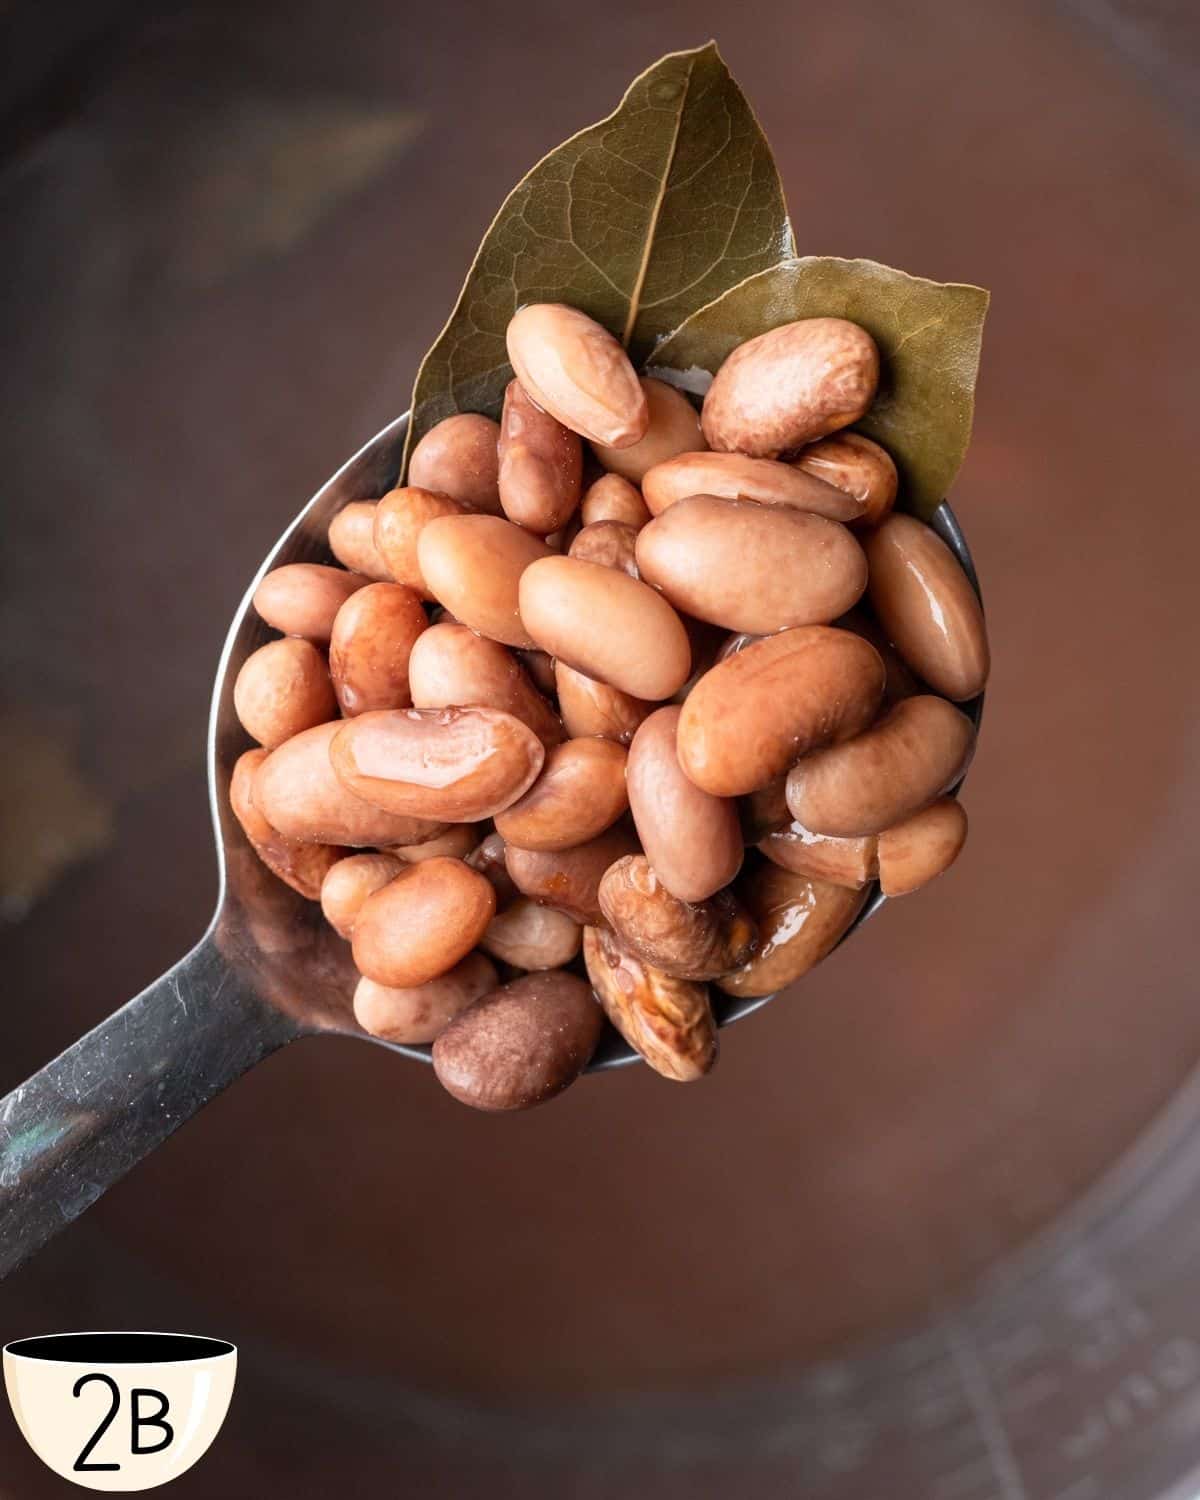 A metal ladle holding cooked pinto beans with a bay leaf, showing the smooth, shiny texture and brown color of the beans.